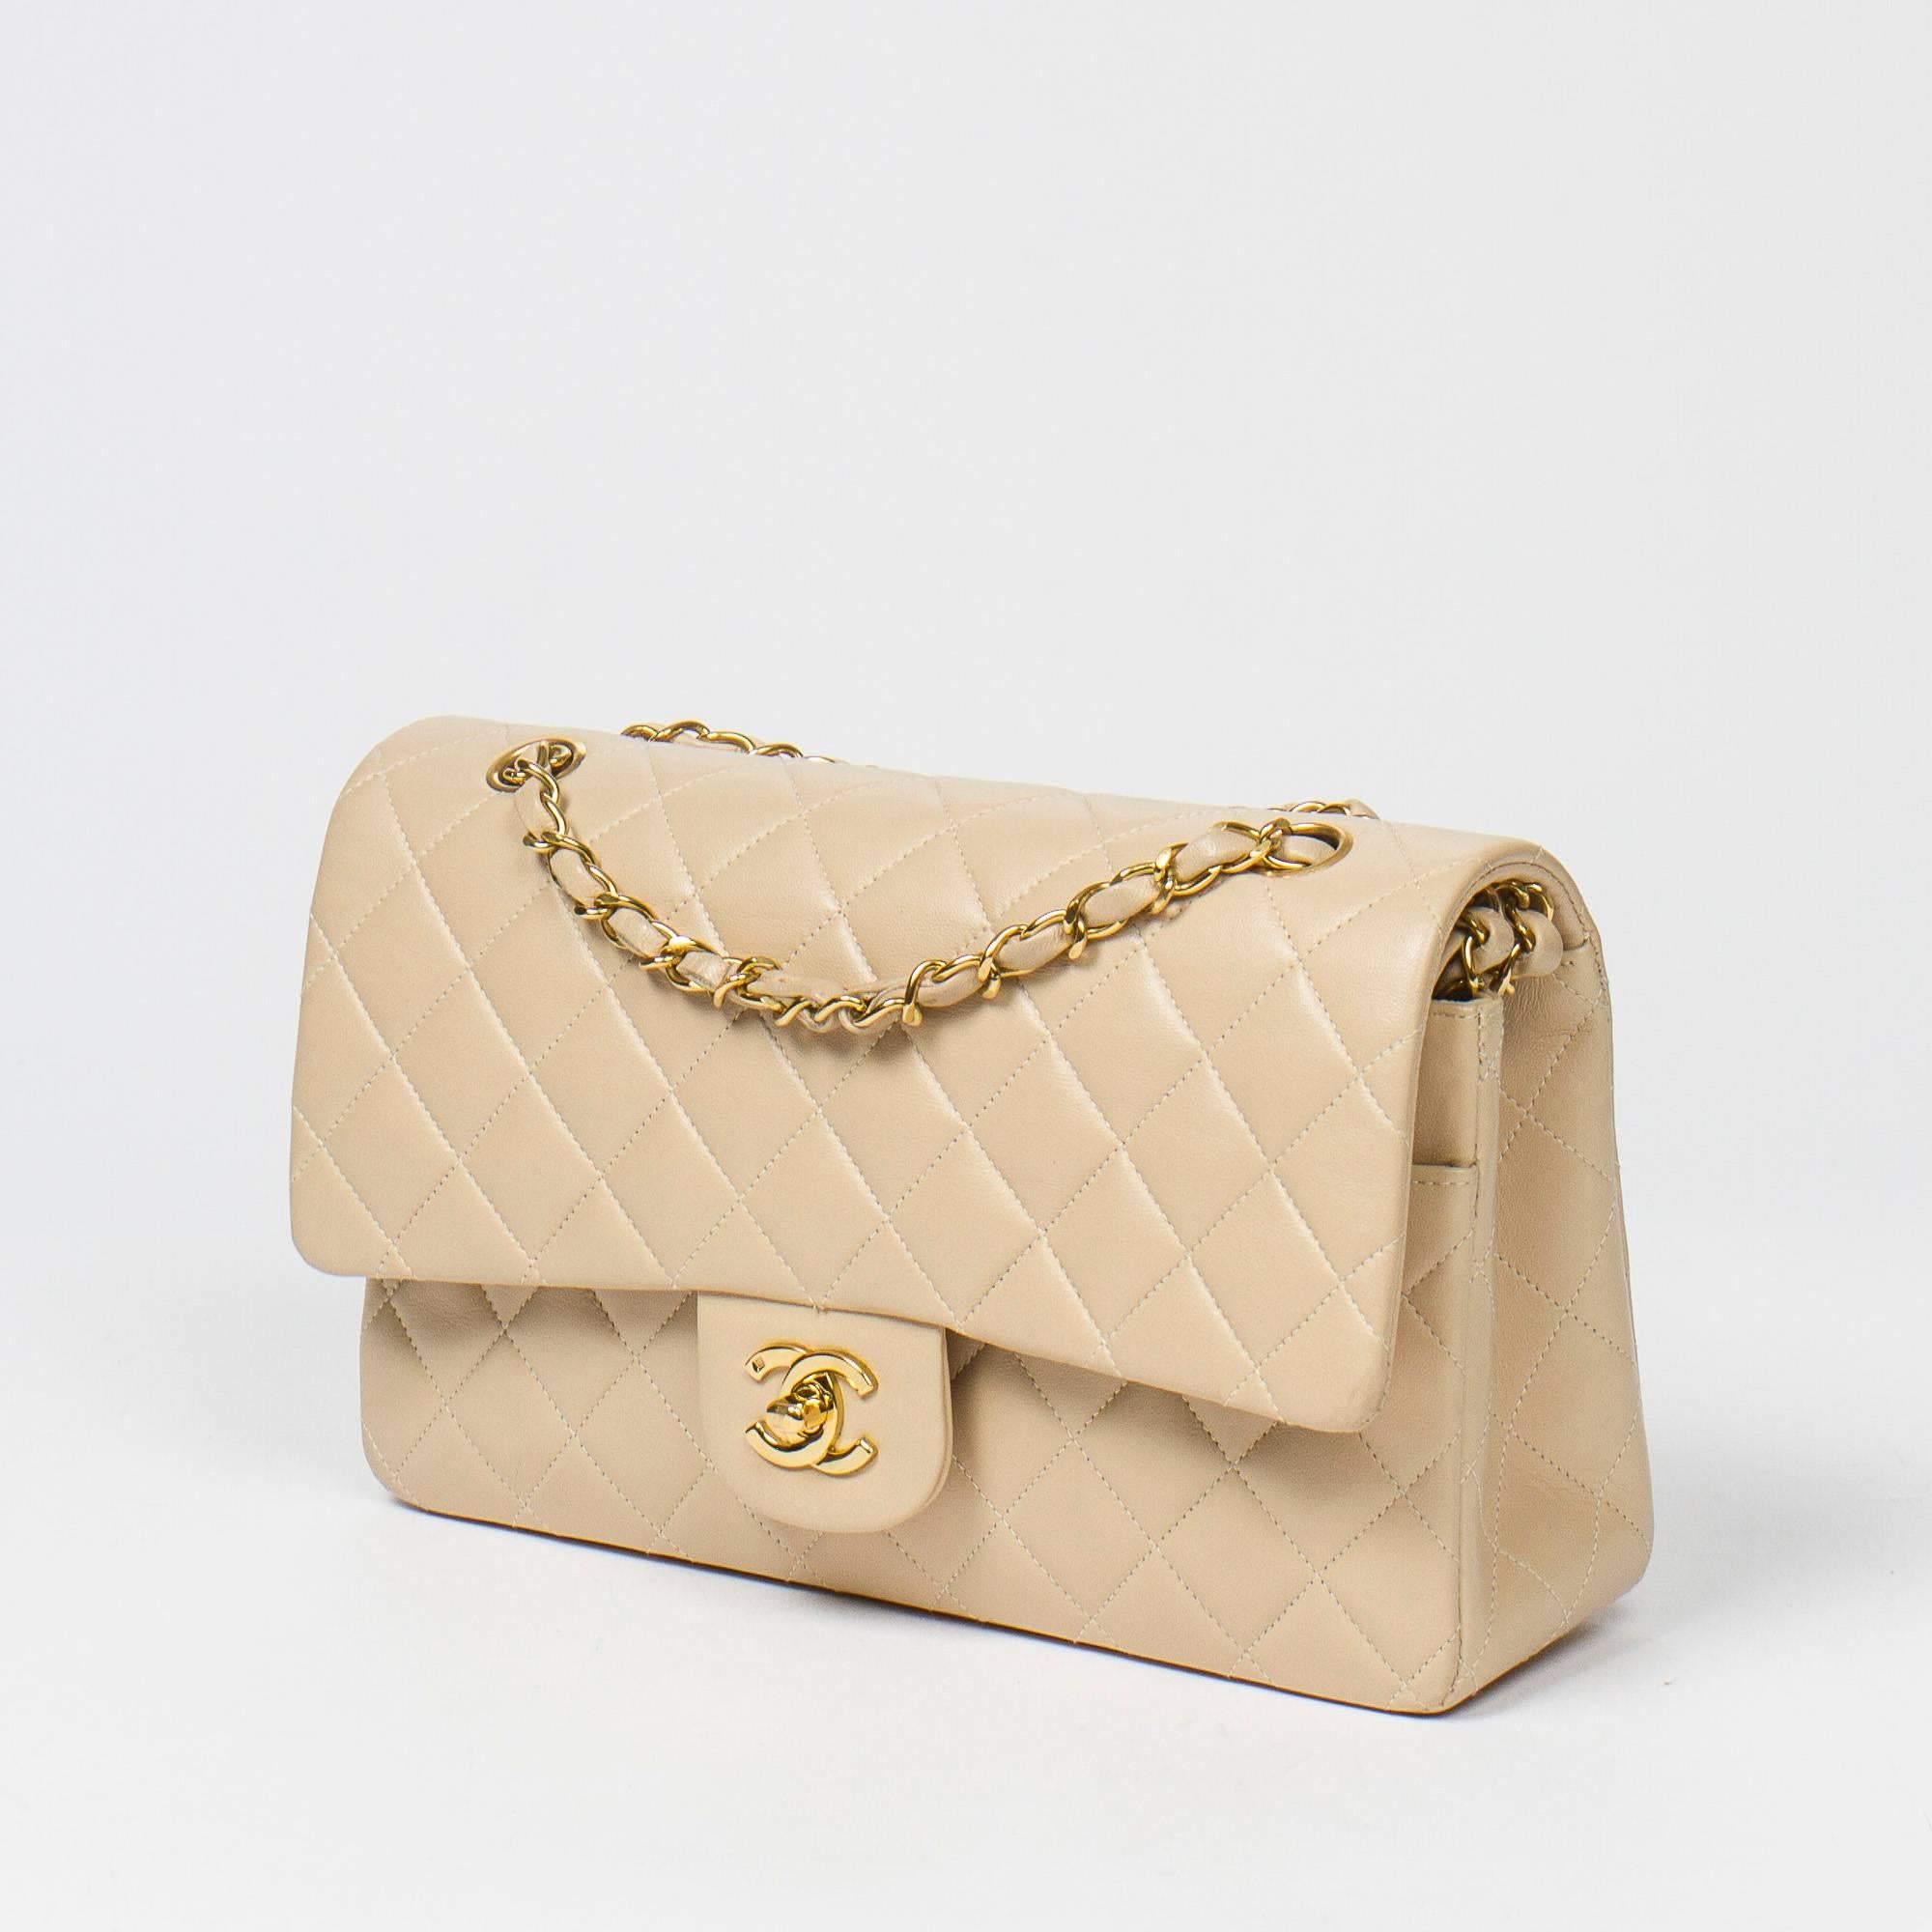 Classic Double Flap in beige quilted calf leather, double chain strap interlaced with leather, signature turnlock closure, gold tone hardware. Back slip pocket. Beige leather lined interior with 3 slip pockets. Gold tone heat stamp 